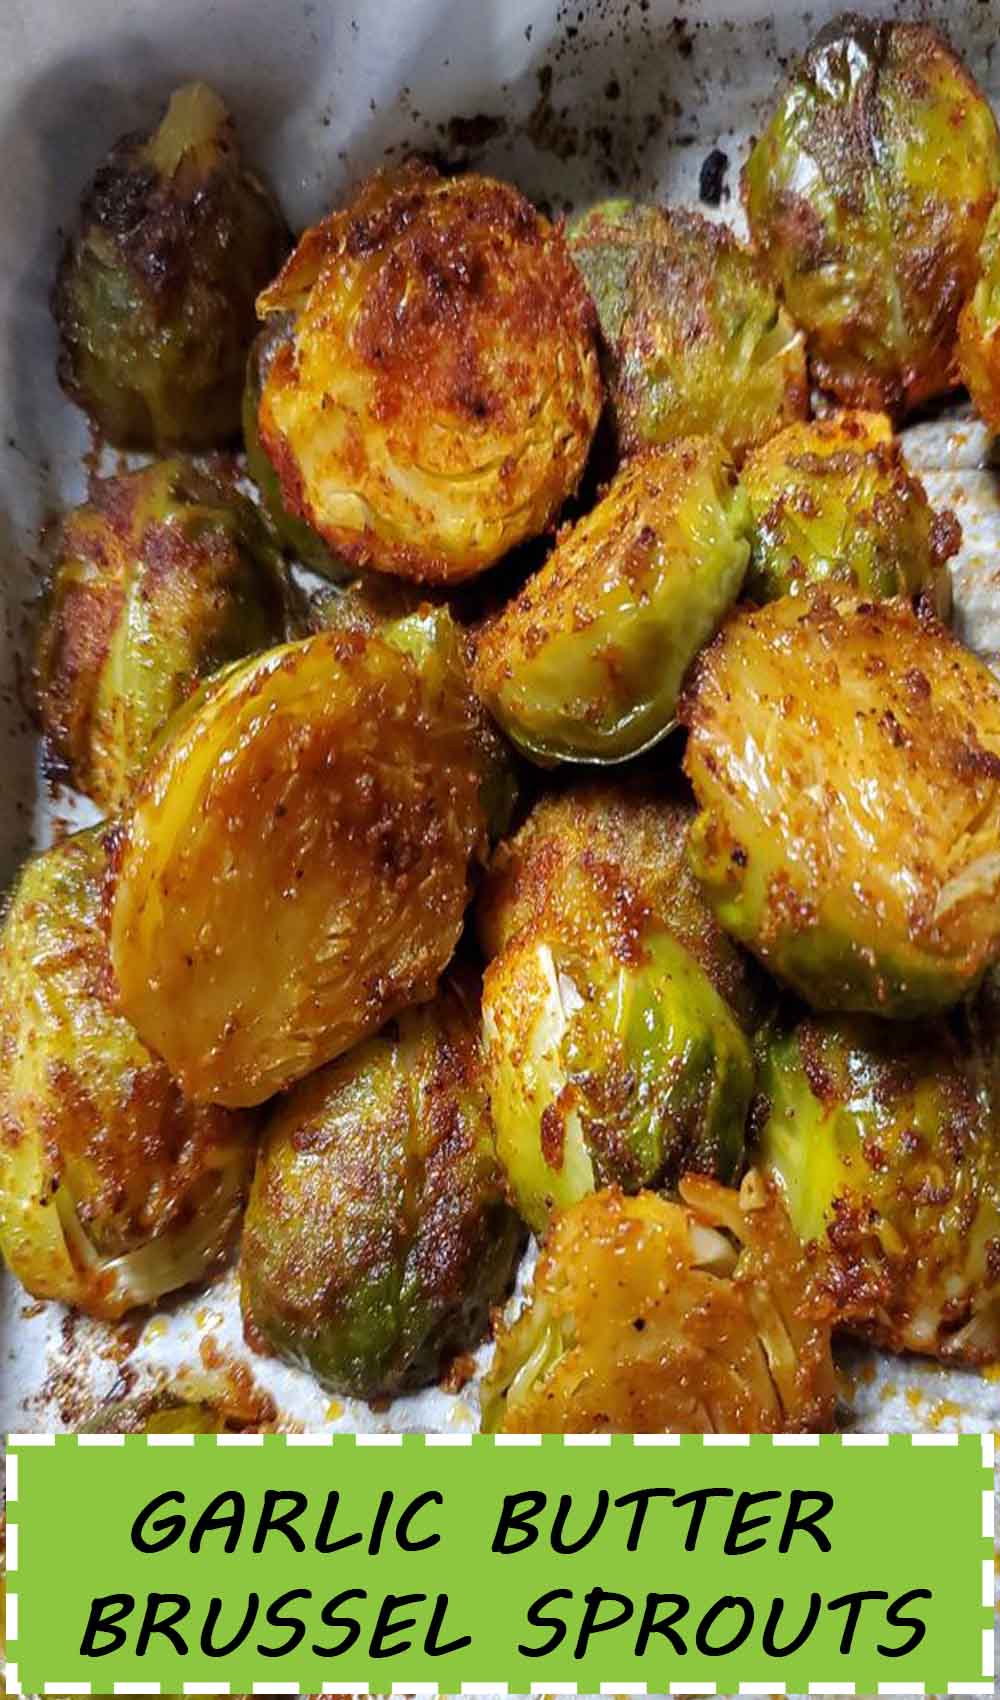 GARLIC BUTTER BRUSSEL SPROUTS